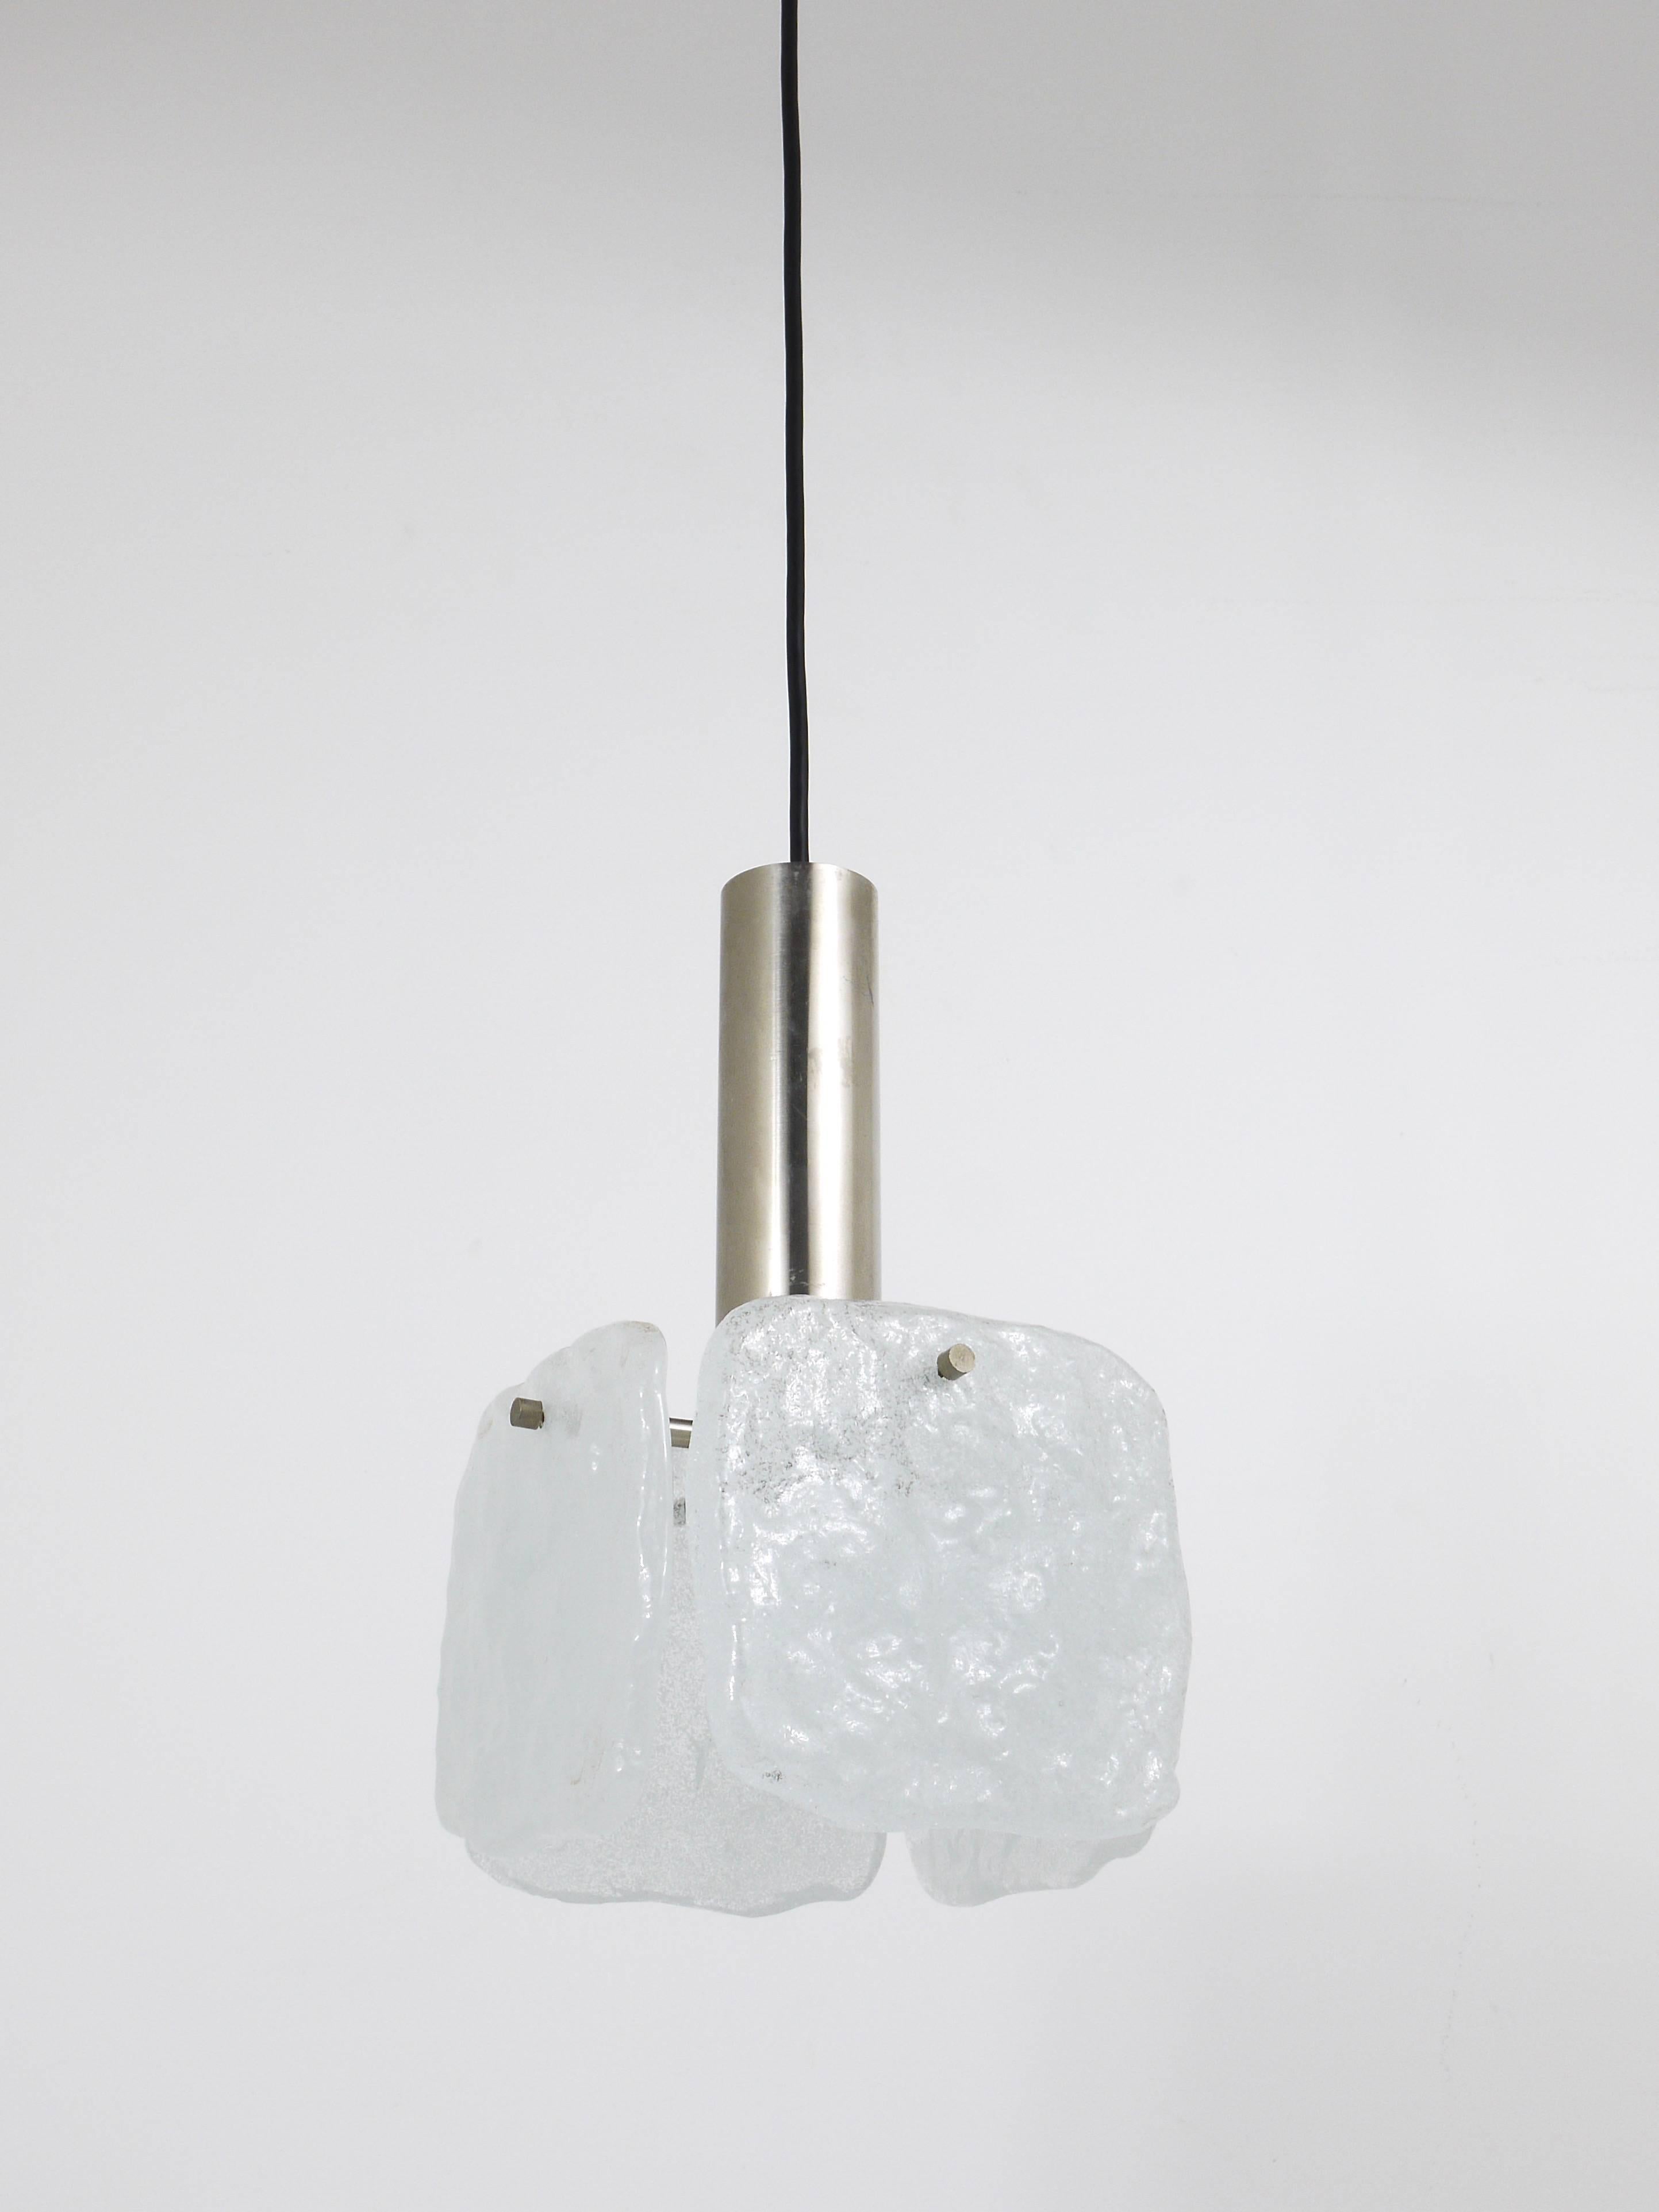 Up to two beautiful pendant lights, manufactured by Kalmar Austria in the 1960s. Sold and priced per piece. Stainless steel hardware with one light source and four square frosted ice glass panels on it. In very good condition. 

Each lamp measures